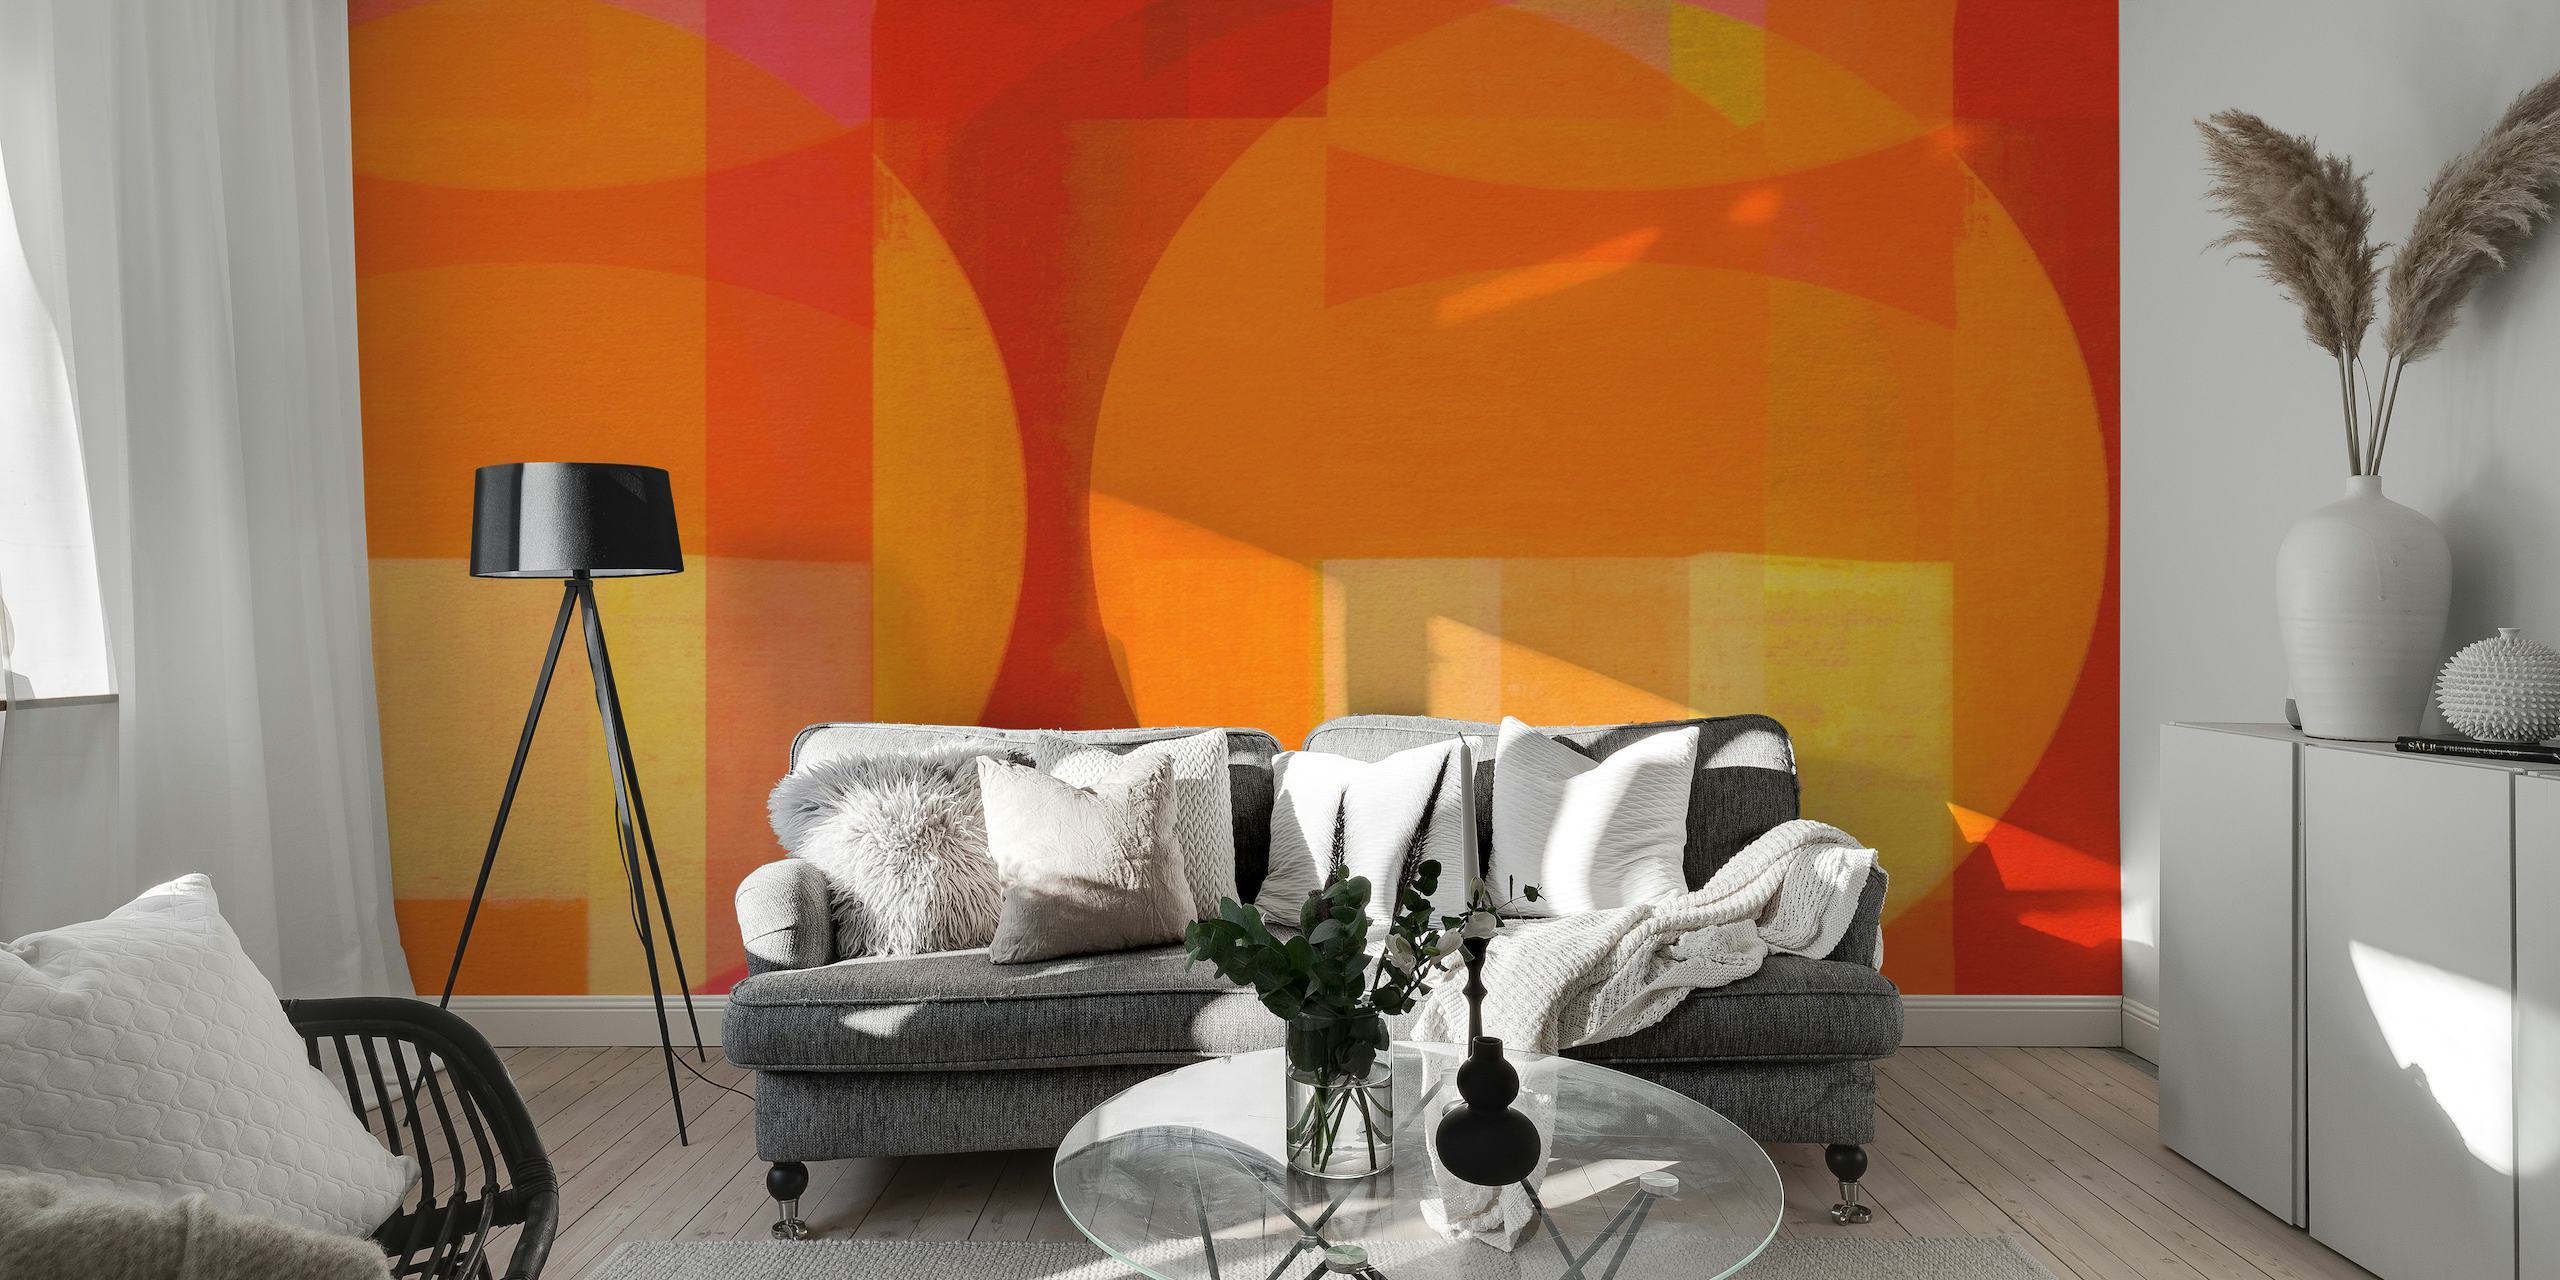 Abstract Bauhaus-style wall mural in a vibrant blend of red, orange, and yellow geometric shapes.